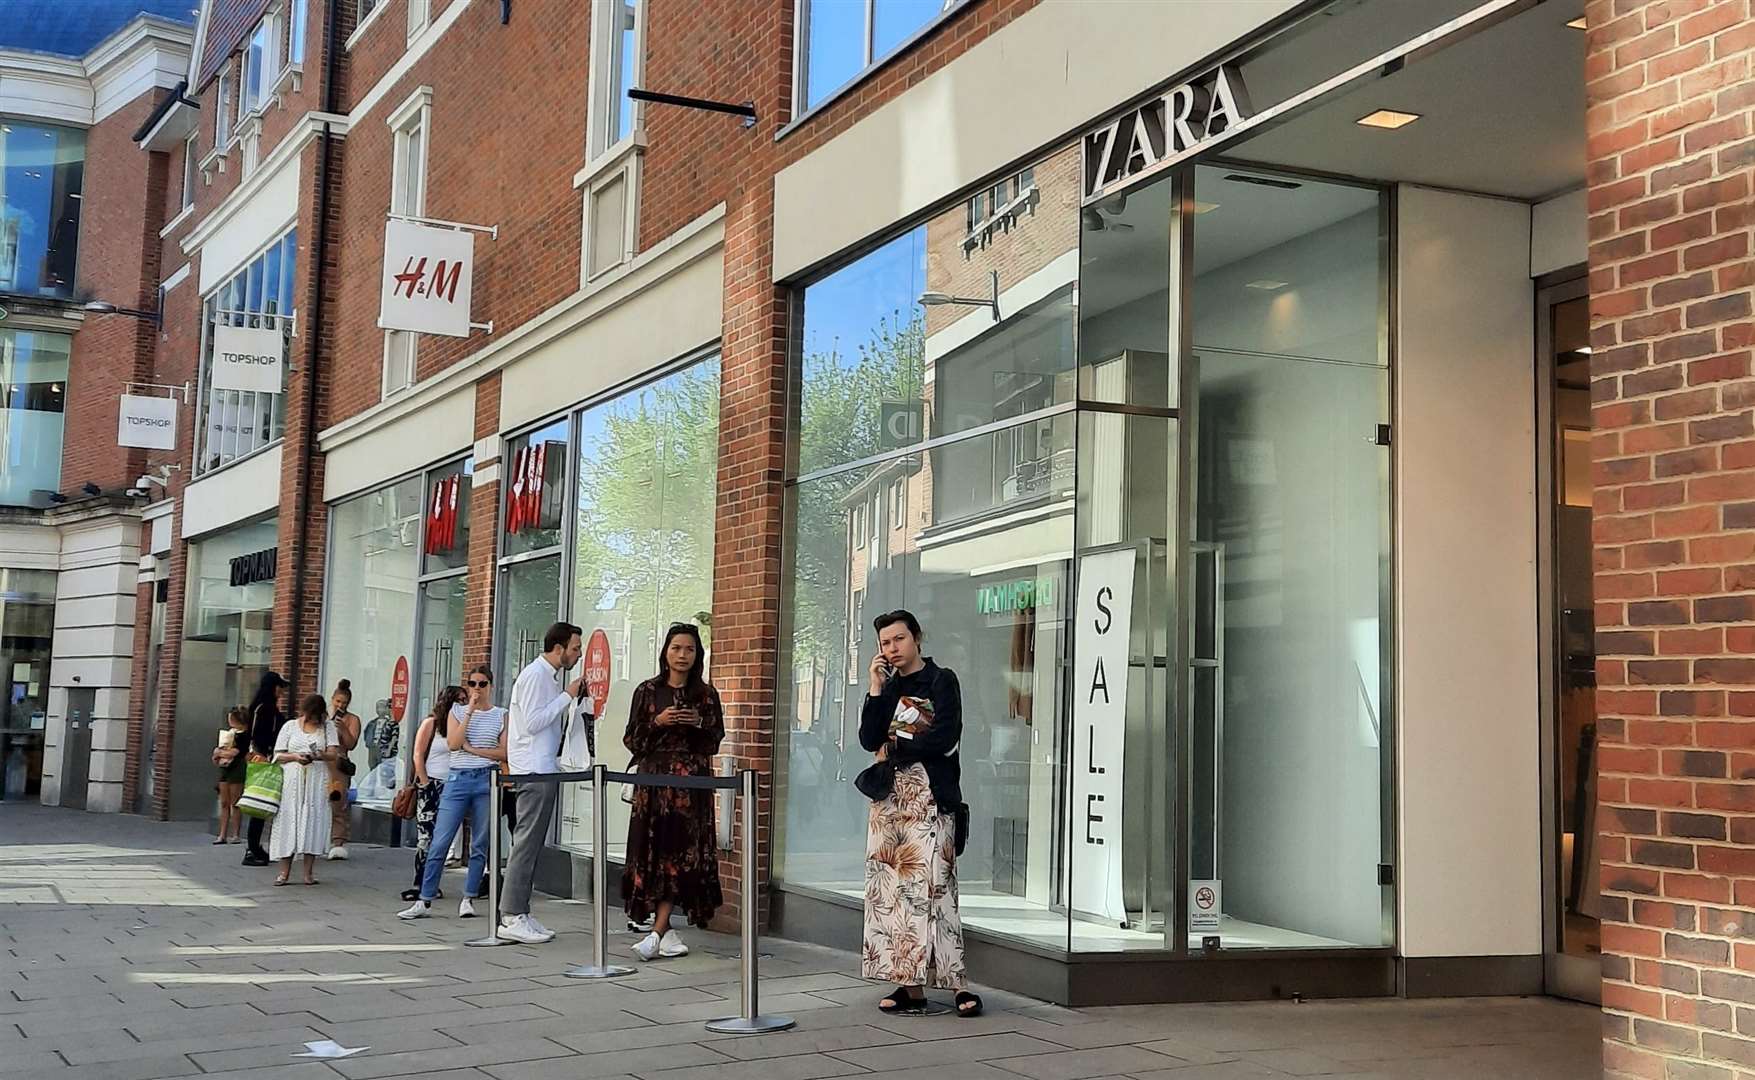 People were keen to shop at Zara in Canterbury